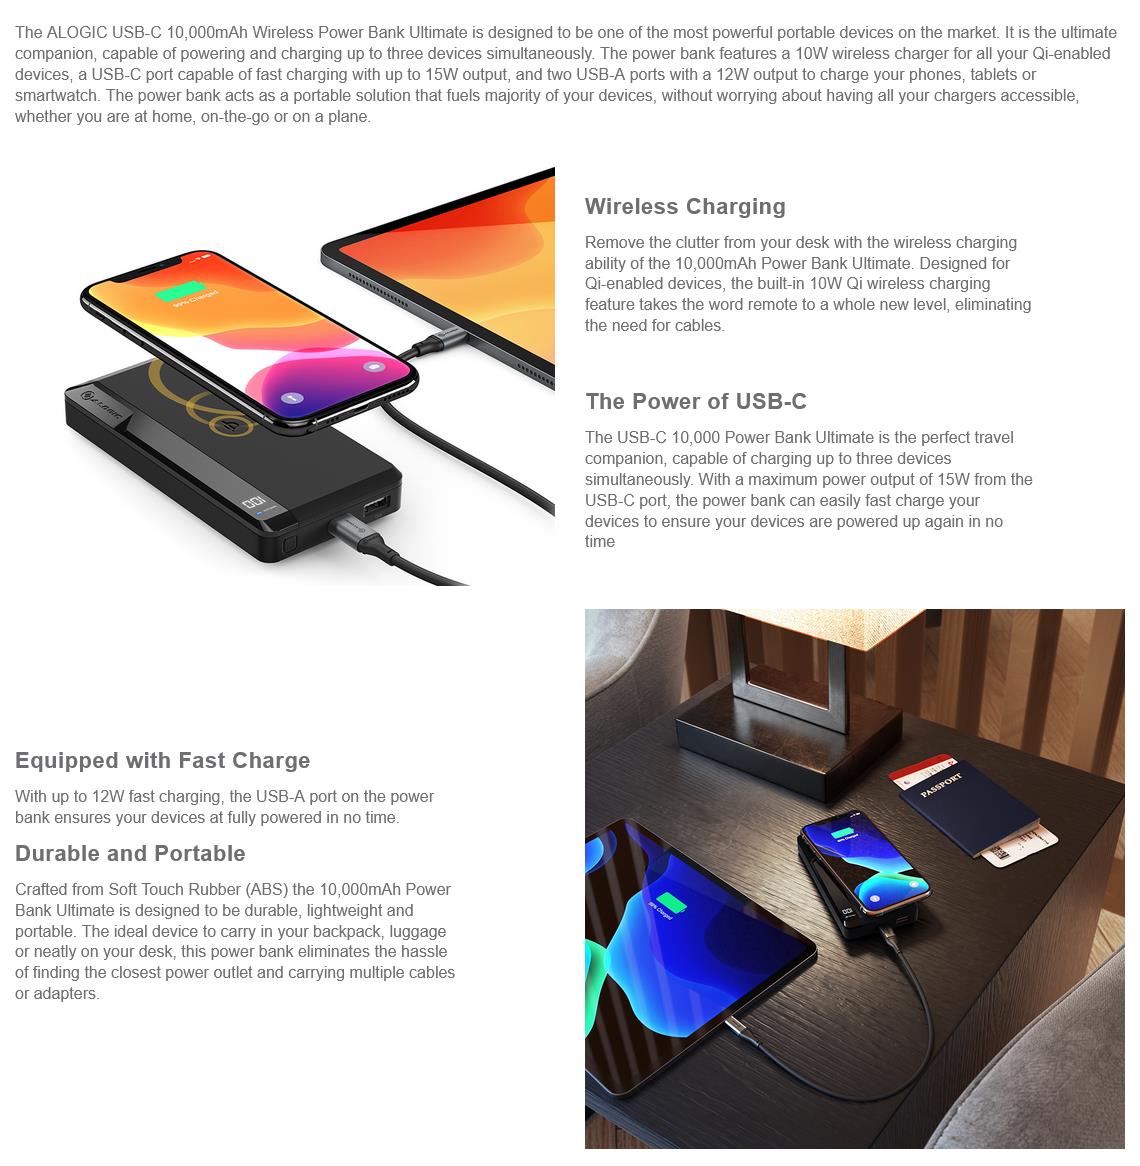 A large marketing image providing additional information about the product ALOGIC USB-C 10,000mAh Power Bank Ultimate - 18W Power Delivery and Wireless Charging - Black - Additional alt info not provided